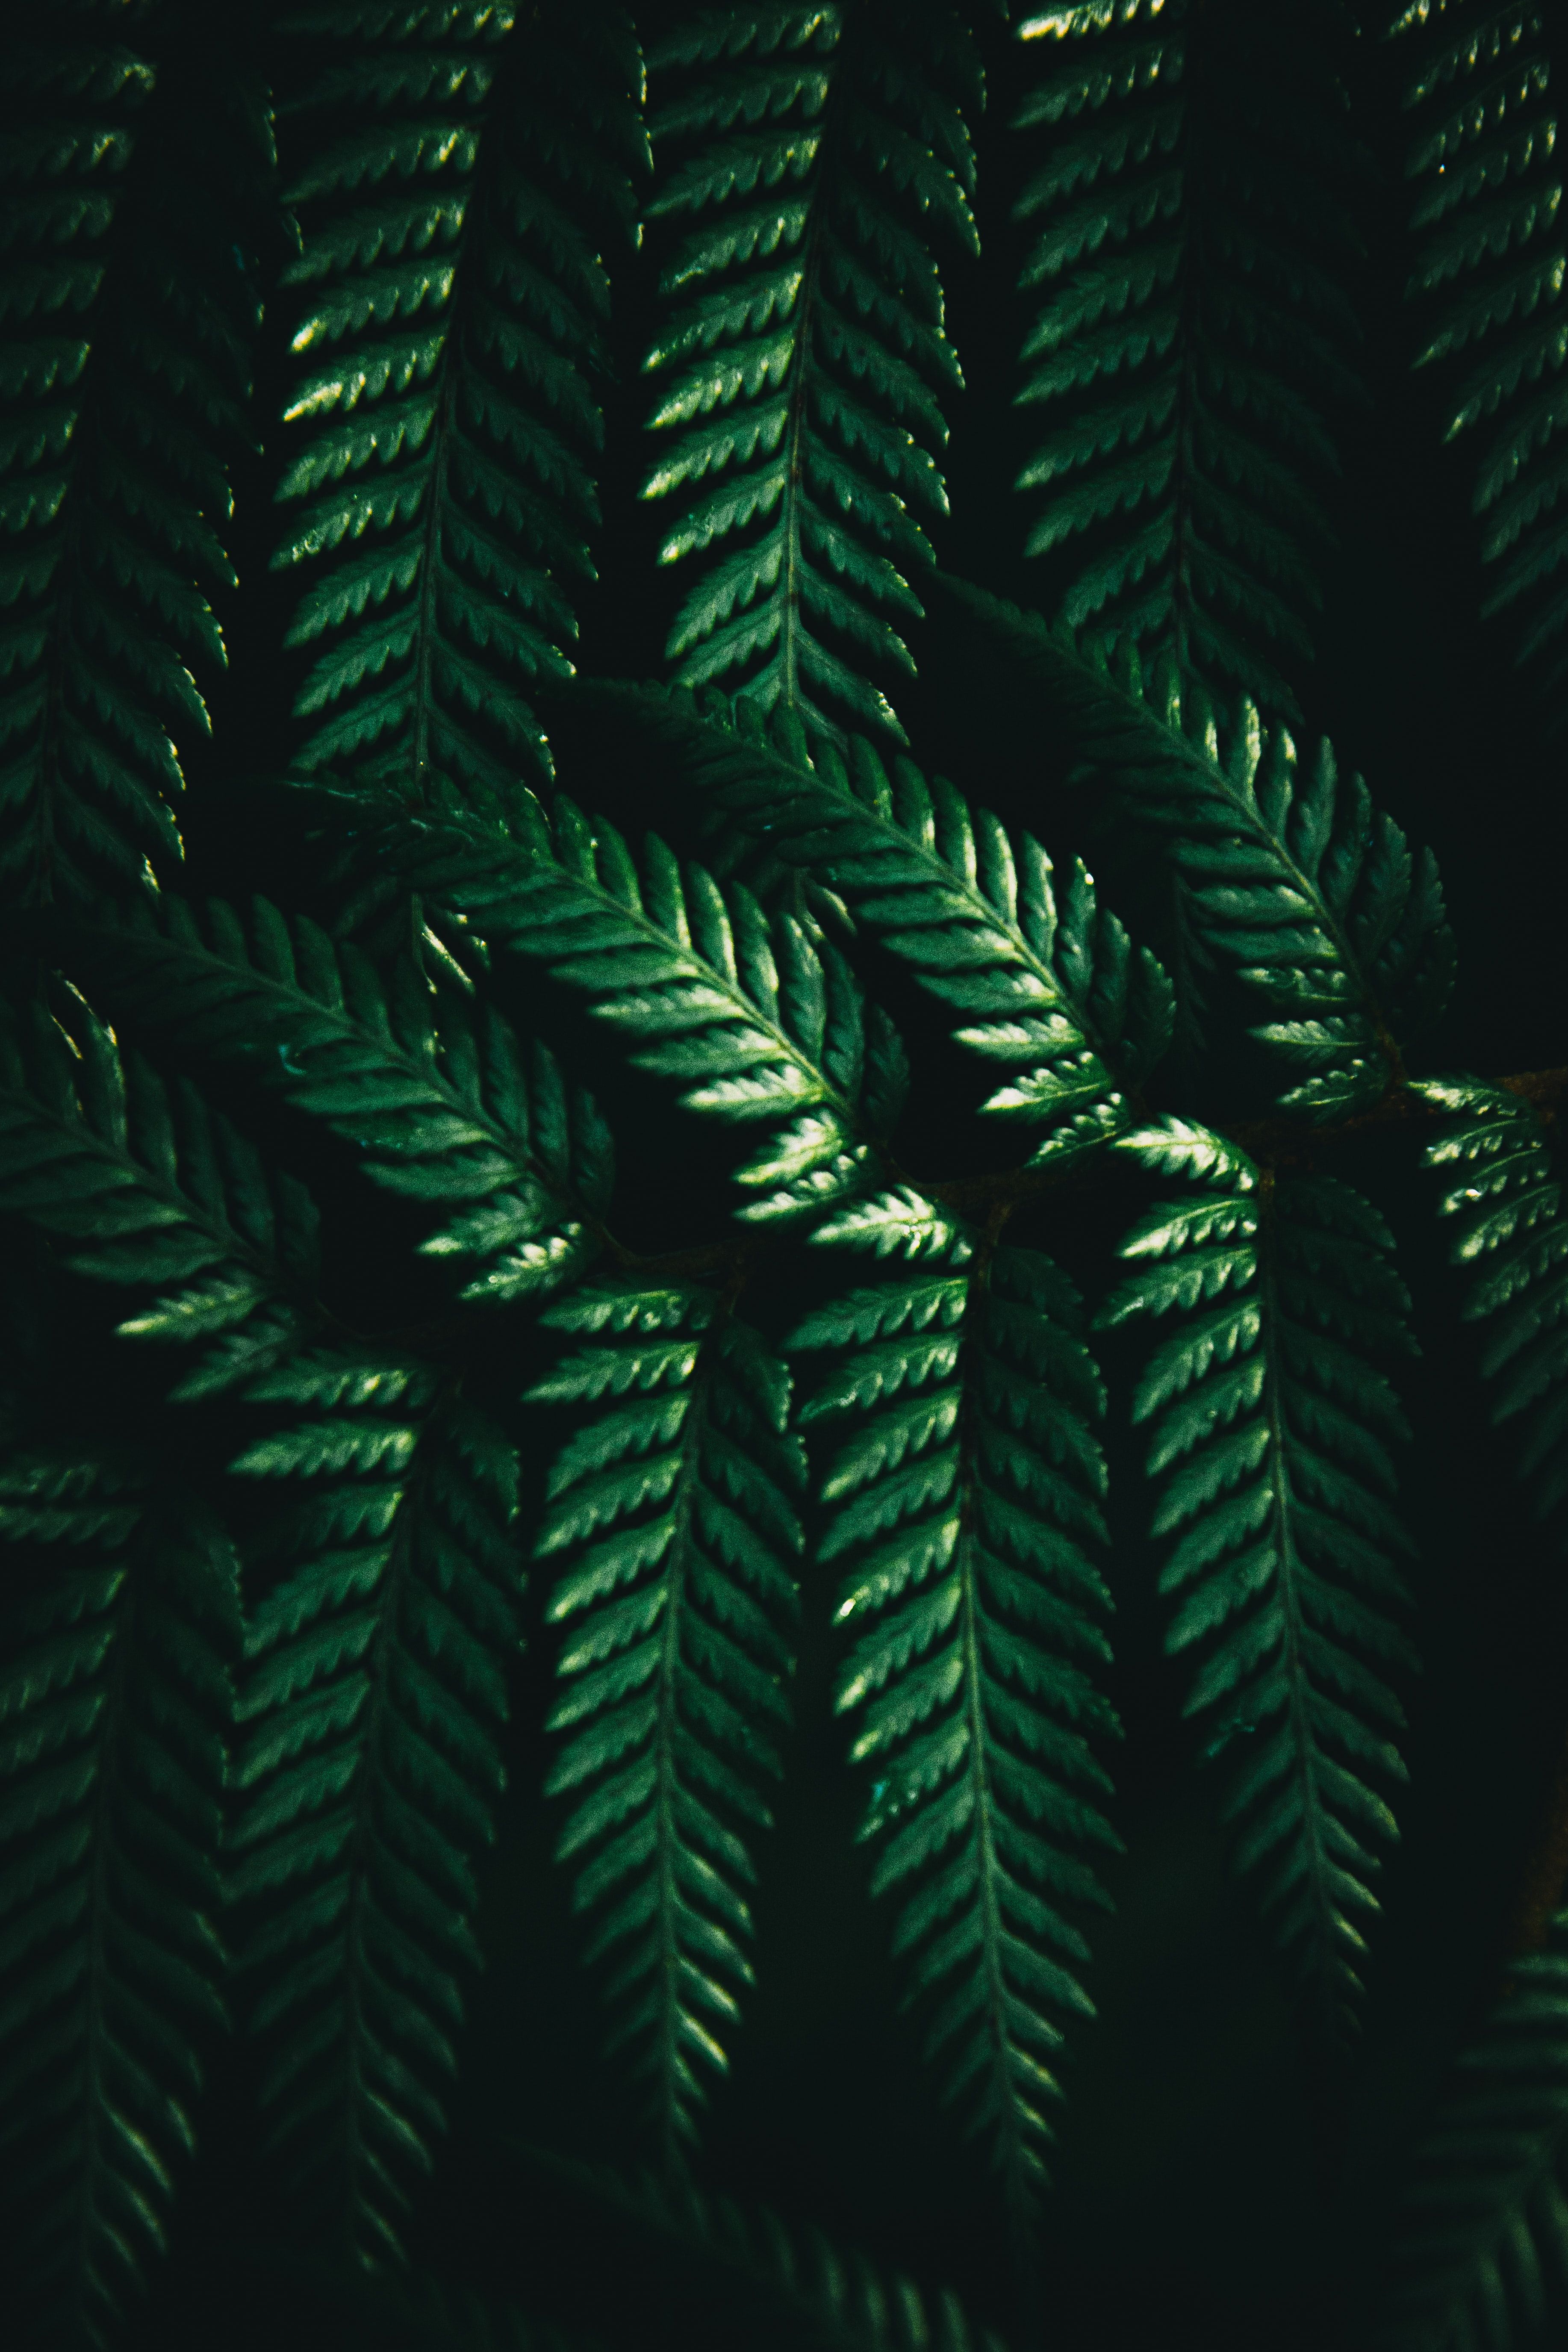 A close-up of a fern plant with its leaves glowing in the dark. - Macro